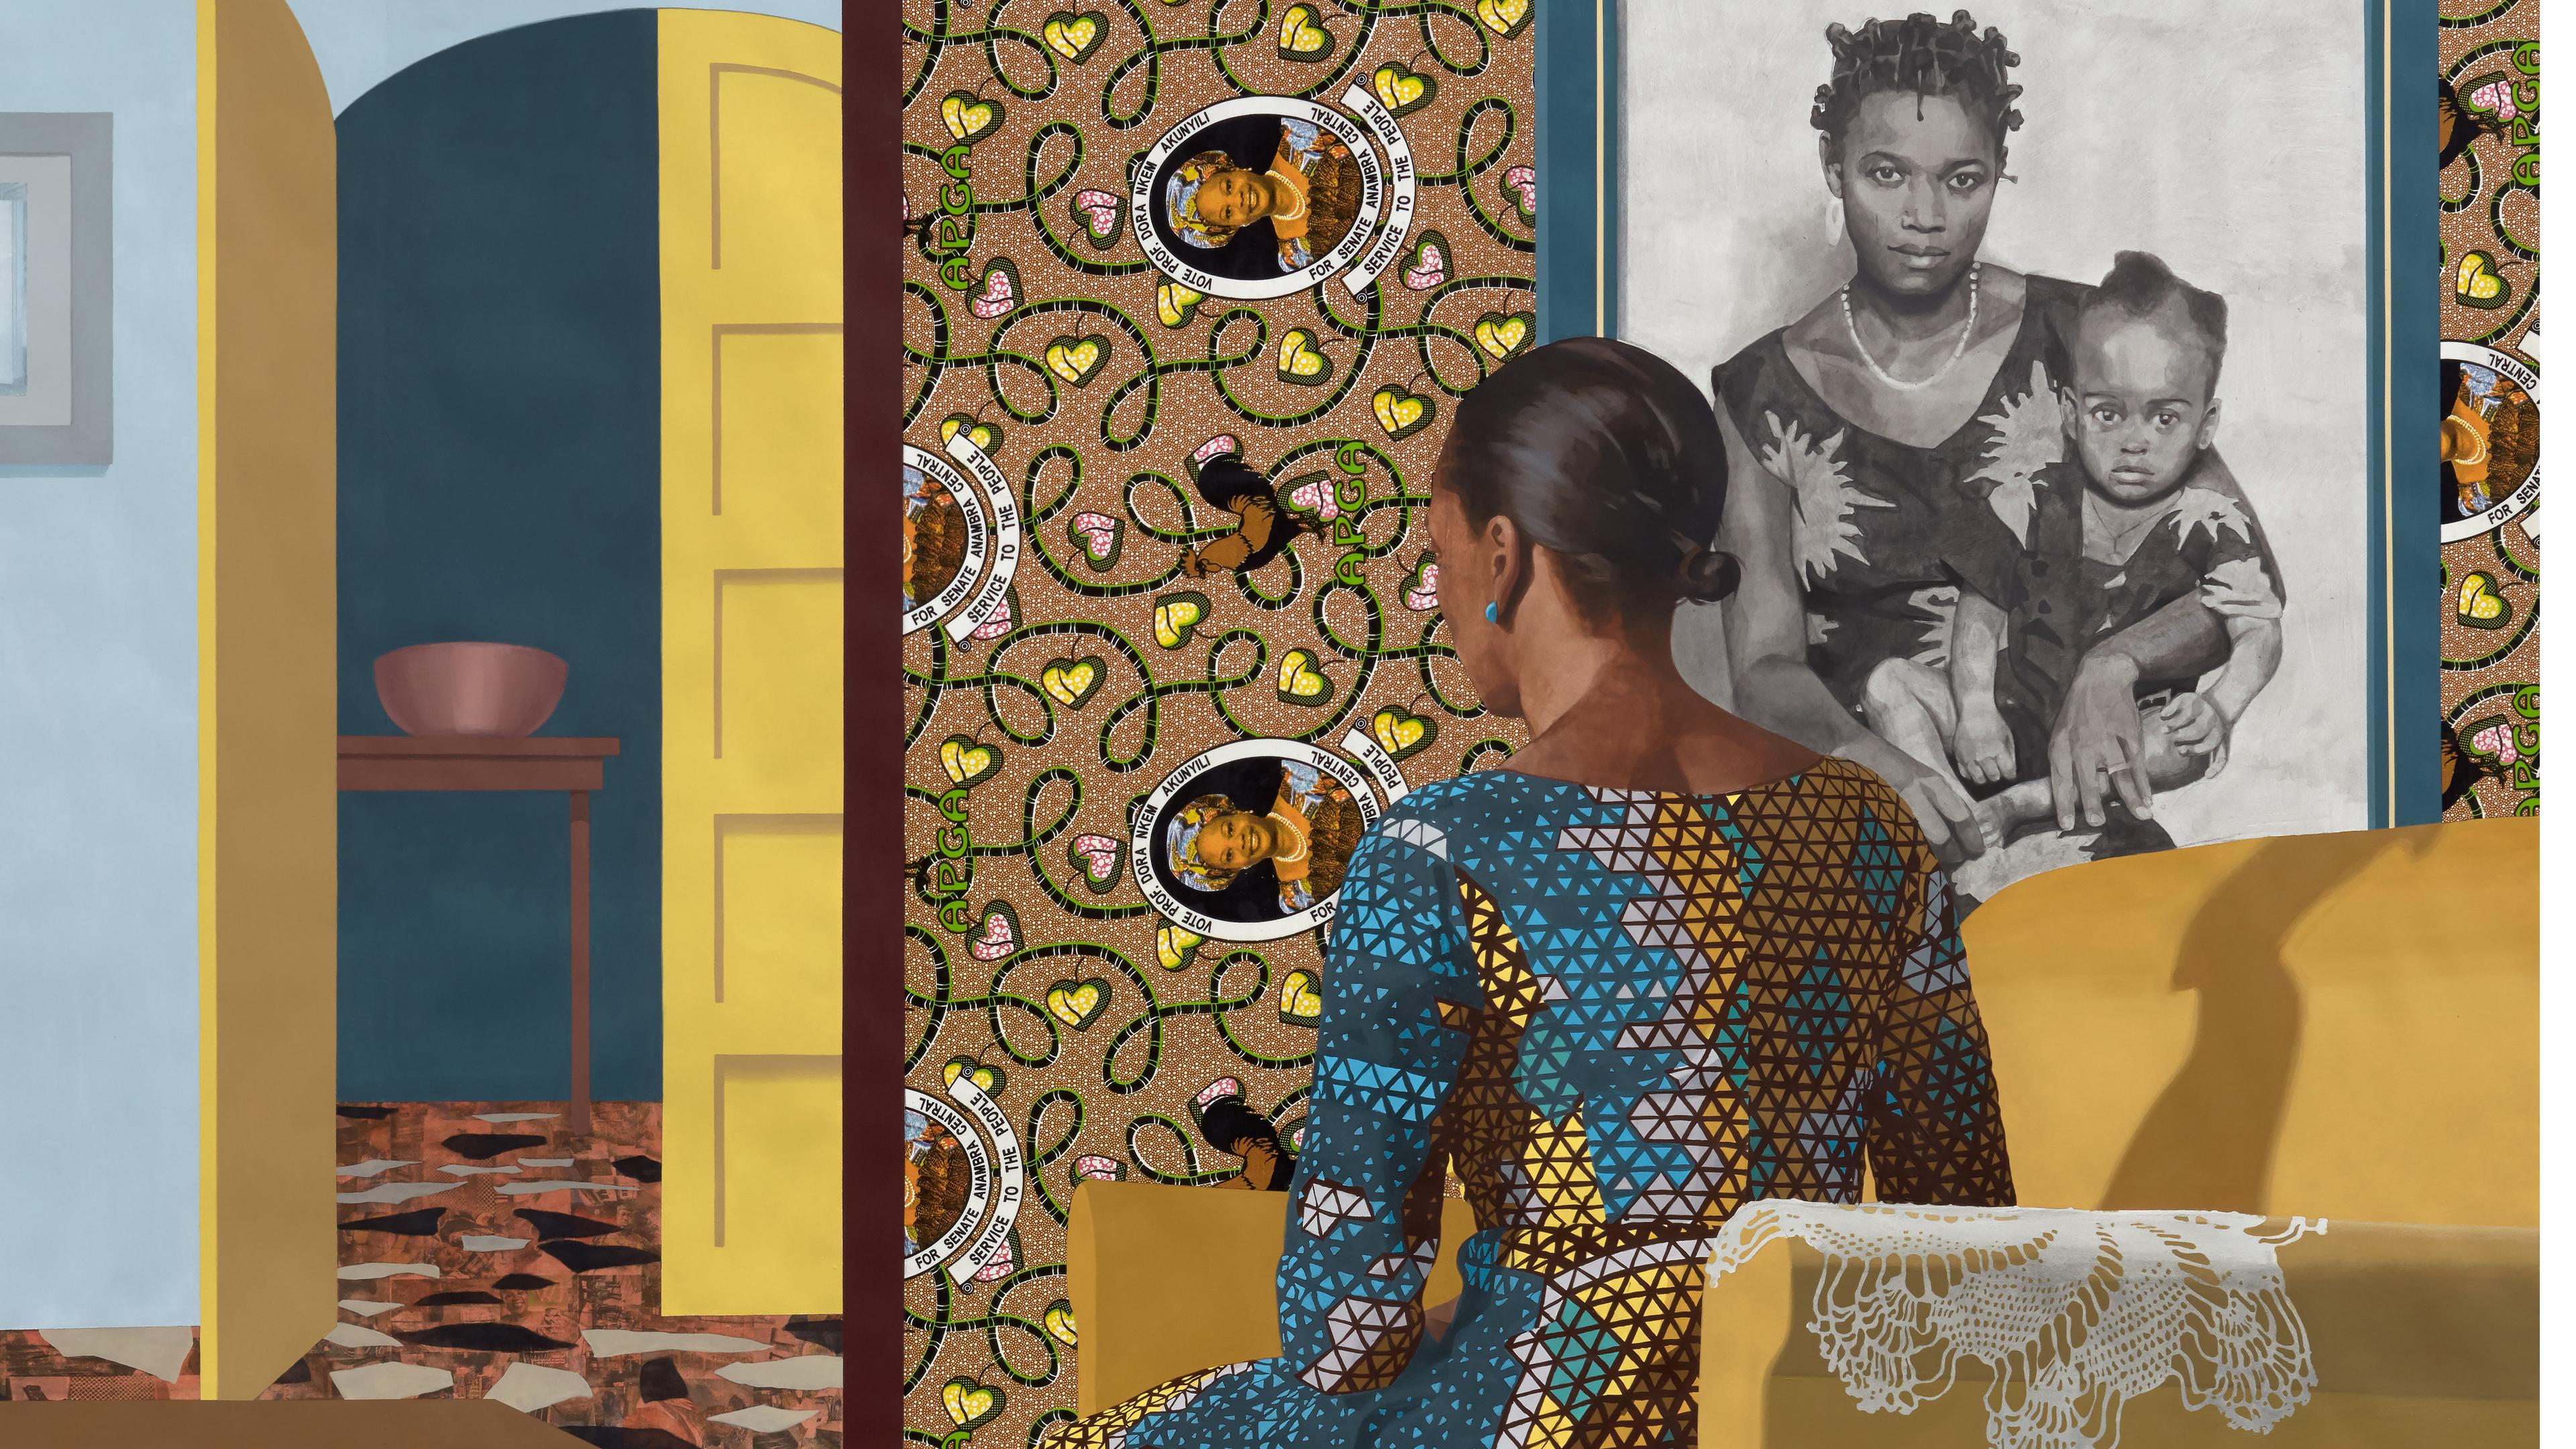 Njideka Akunyili Crosby (Nigerian, b. 1983). Mother and Child, 2016. Acrylic, transfer printing, colored pencil, cut and pasted paper, and printed fabric on paper, 95 3/4 in. x 10 ft. 4 1/4 in. (243.2 x 315.6 cm). The Metropolitan Museum of Art, New York, Purchase, The Jacques and Natasha Gelman Foundation Gift, 2017 (2017.106). © Njideka Akunyili Crosby. 